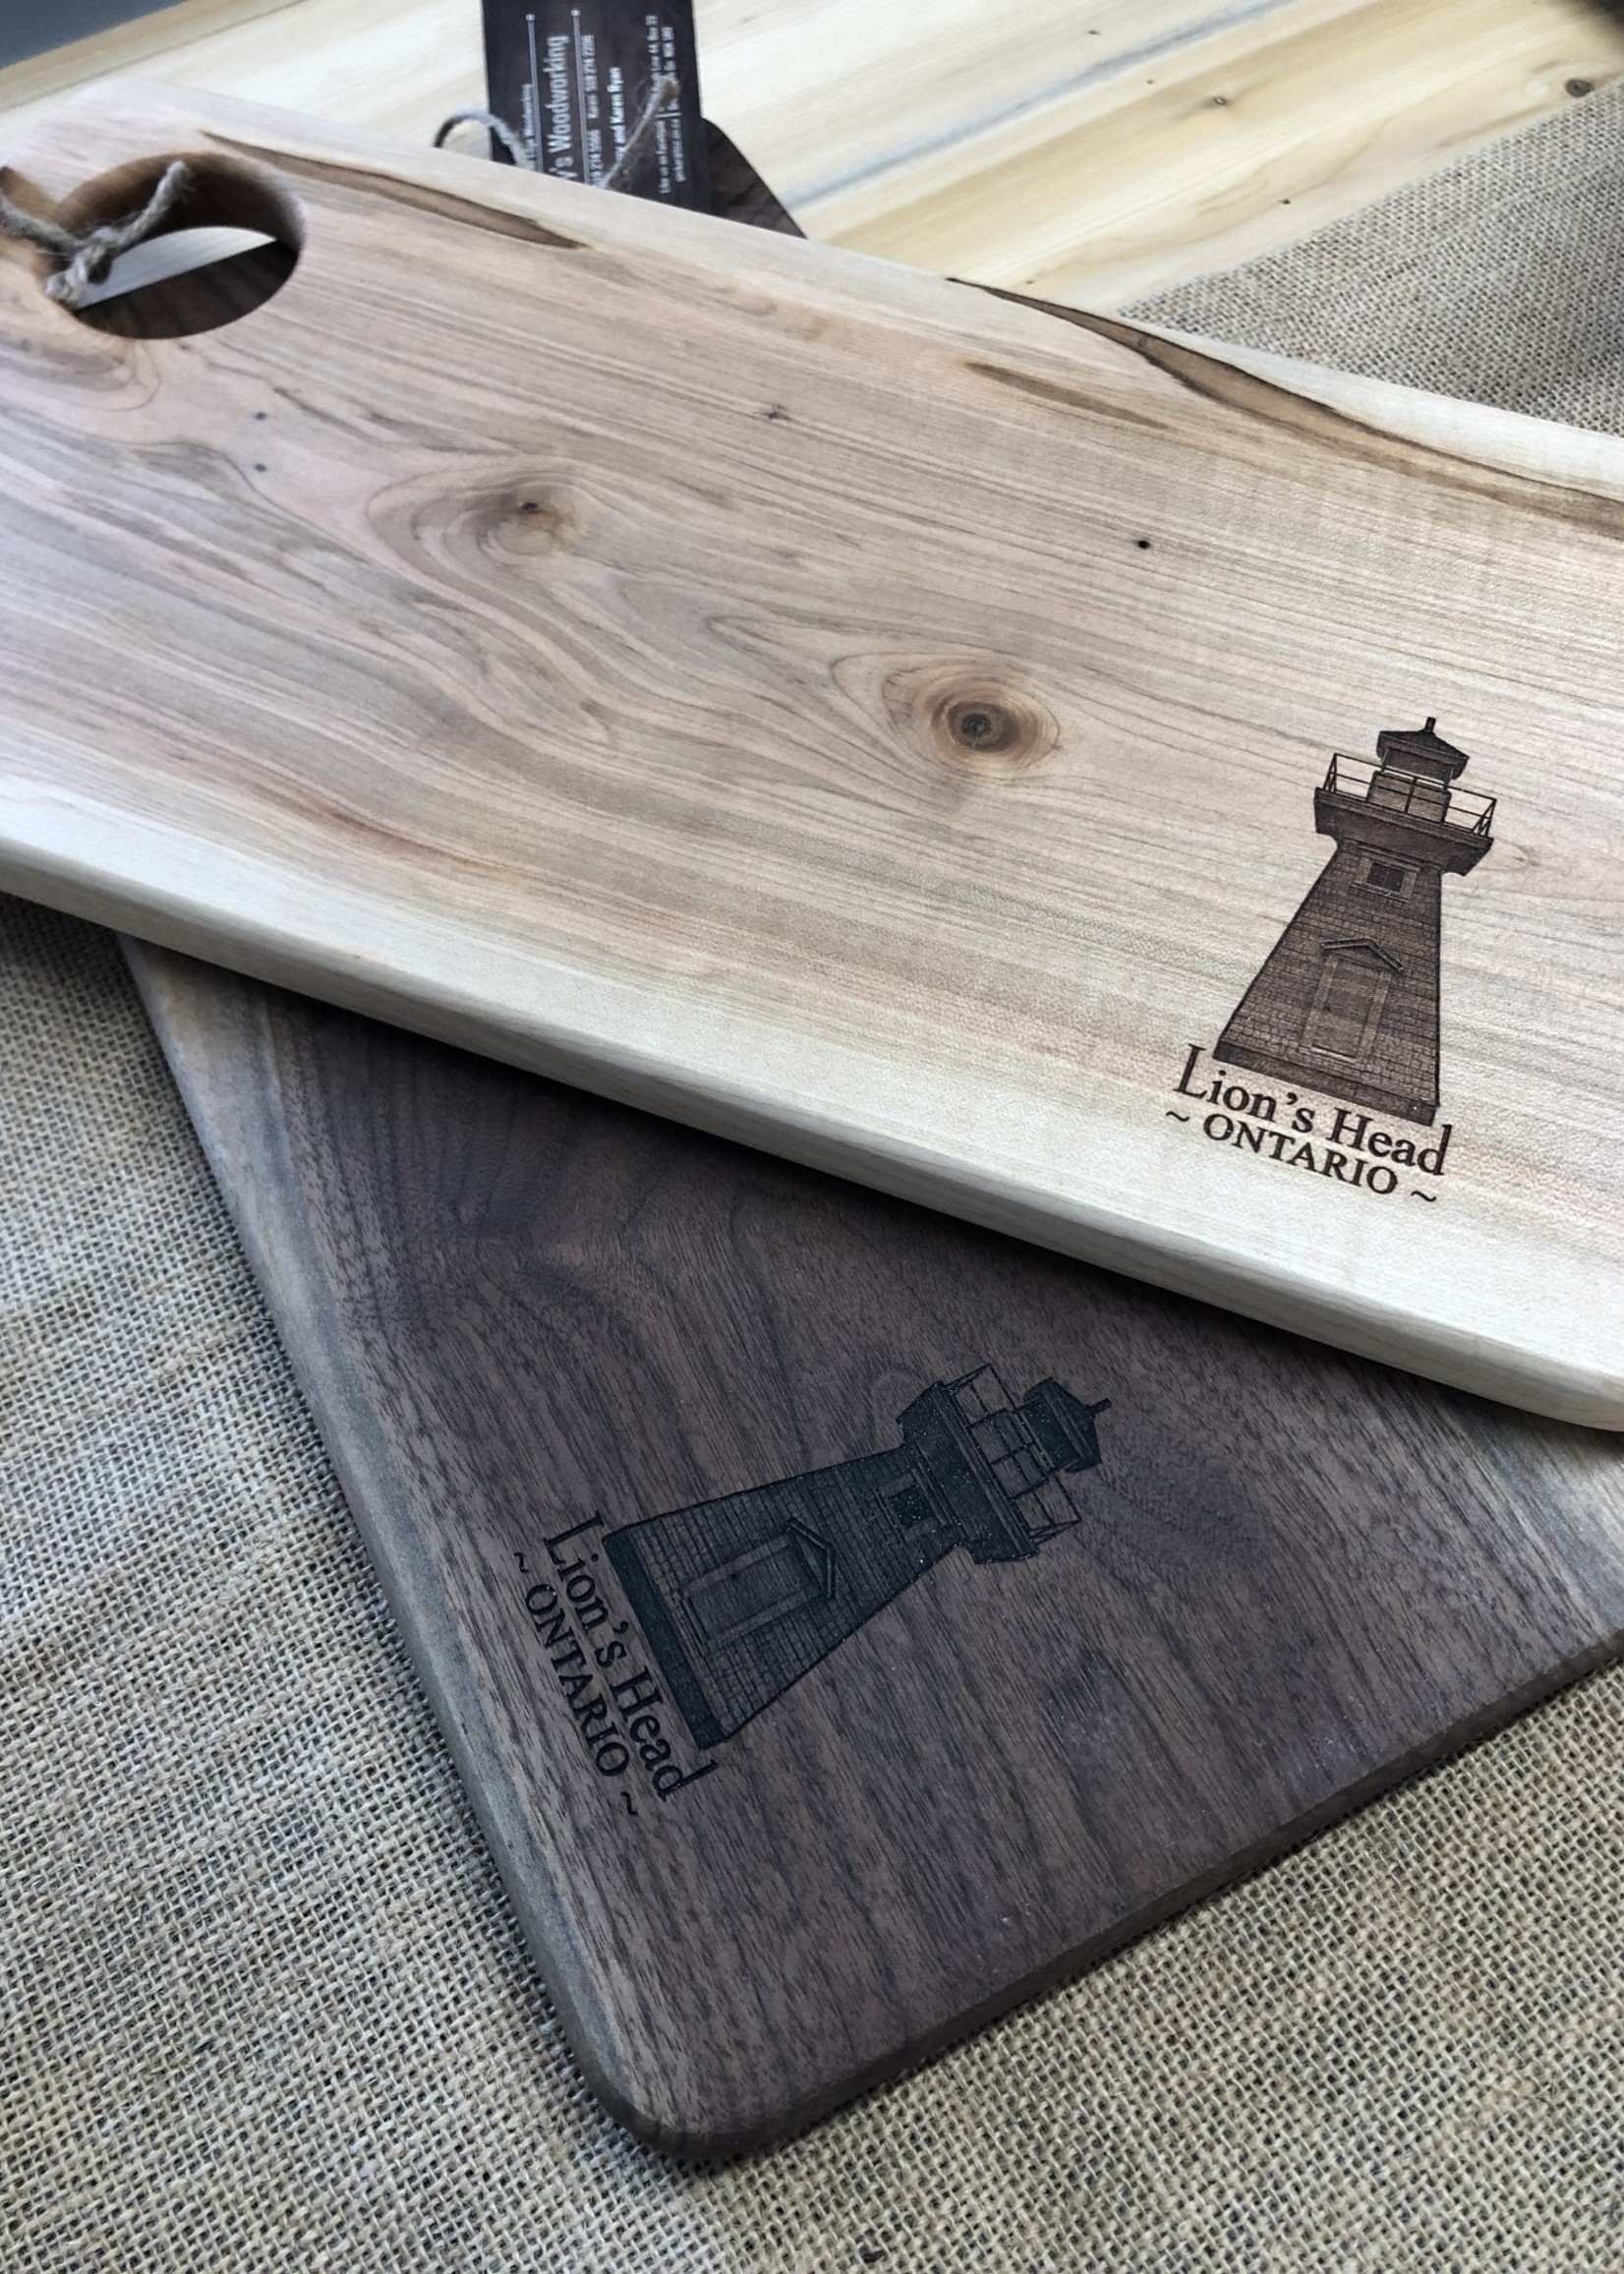 Gerry's Woodworking Lions Head Lighthouse Charcuterie Board